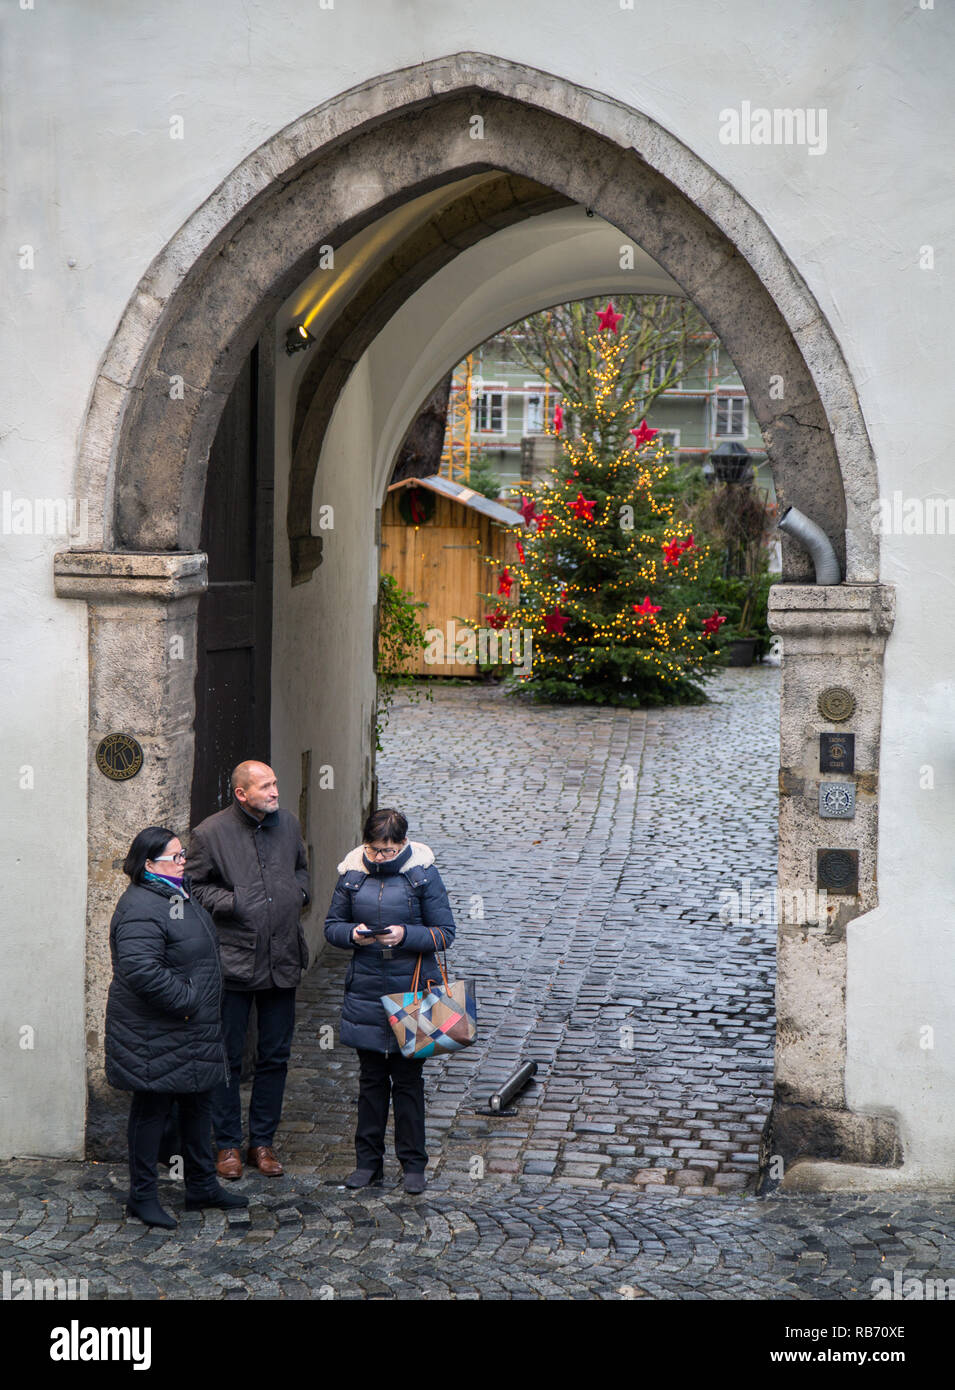 Thre people waiting in the medieval arched entrance to the Bischofshof Hotel in Regensburg. A Christmas tree can be seen in the courtyard beyond. Stock Photo